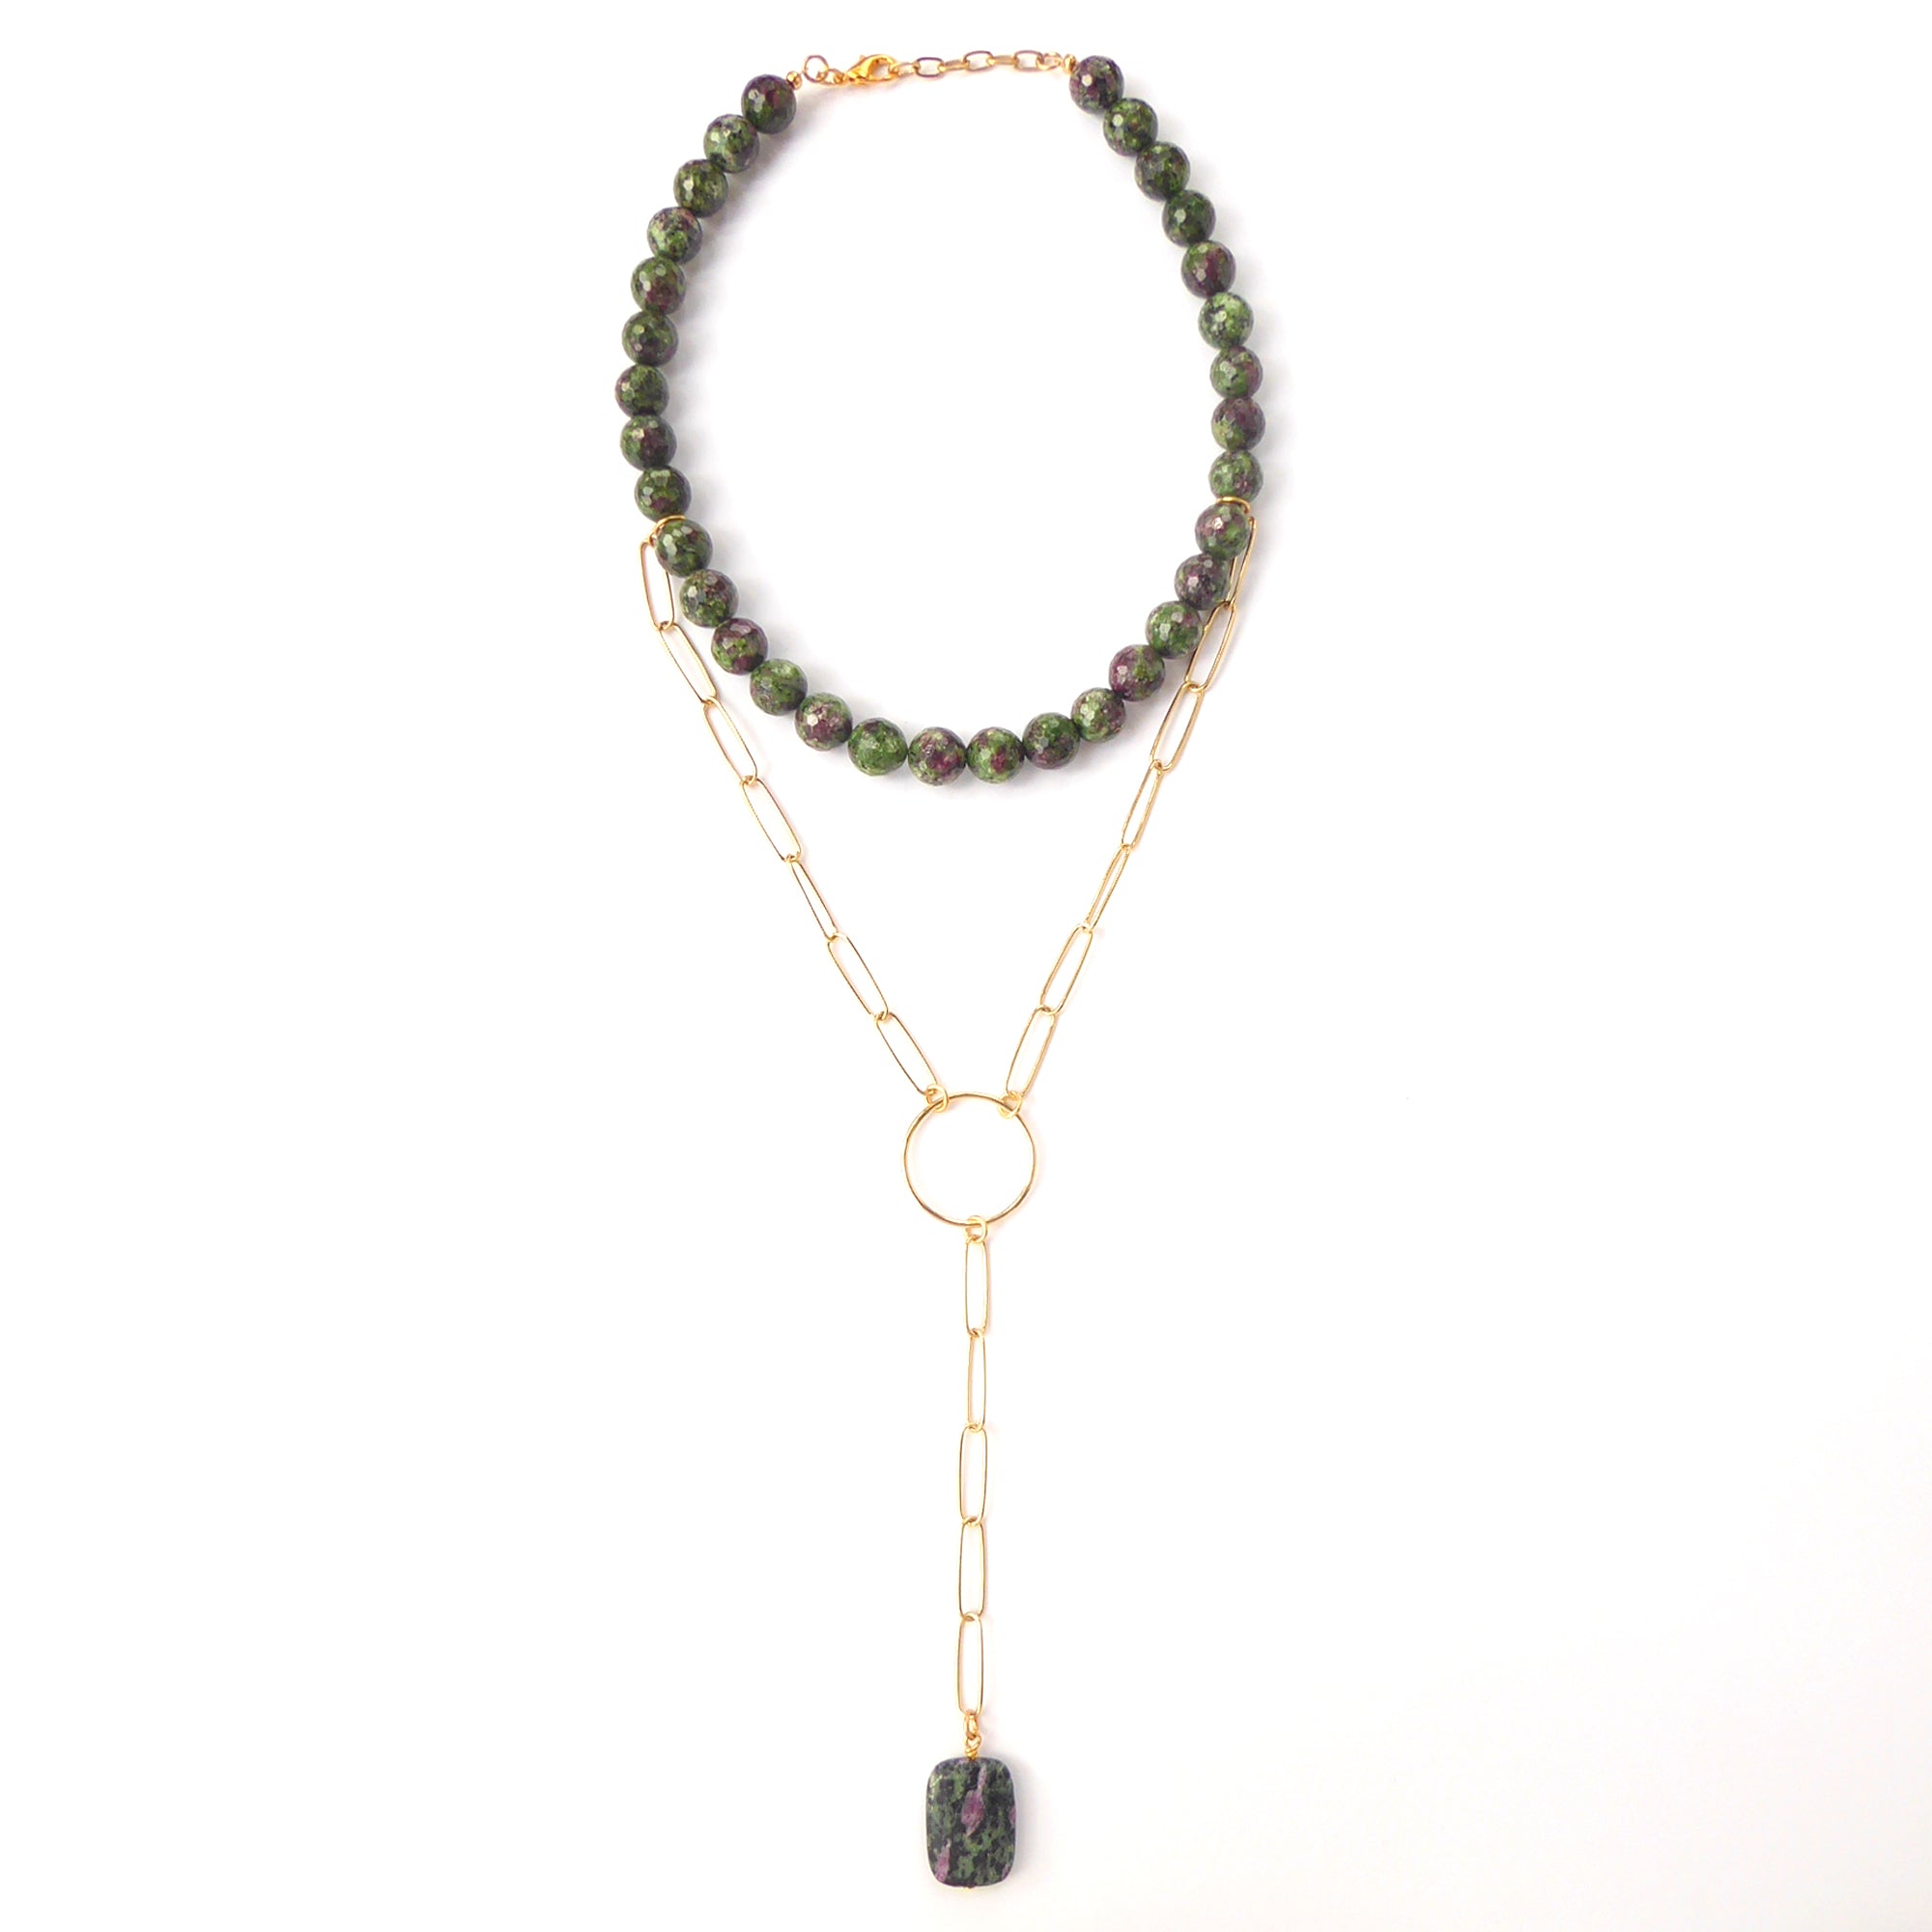 Ruby in zoisite necklace by Jenny Dayco 7